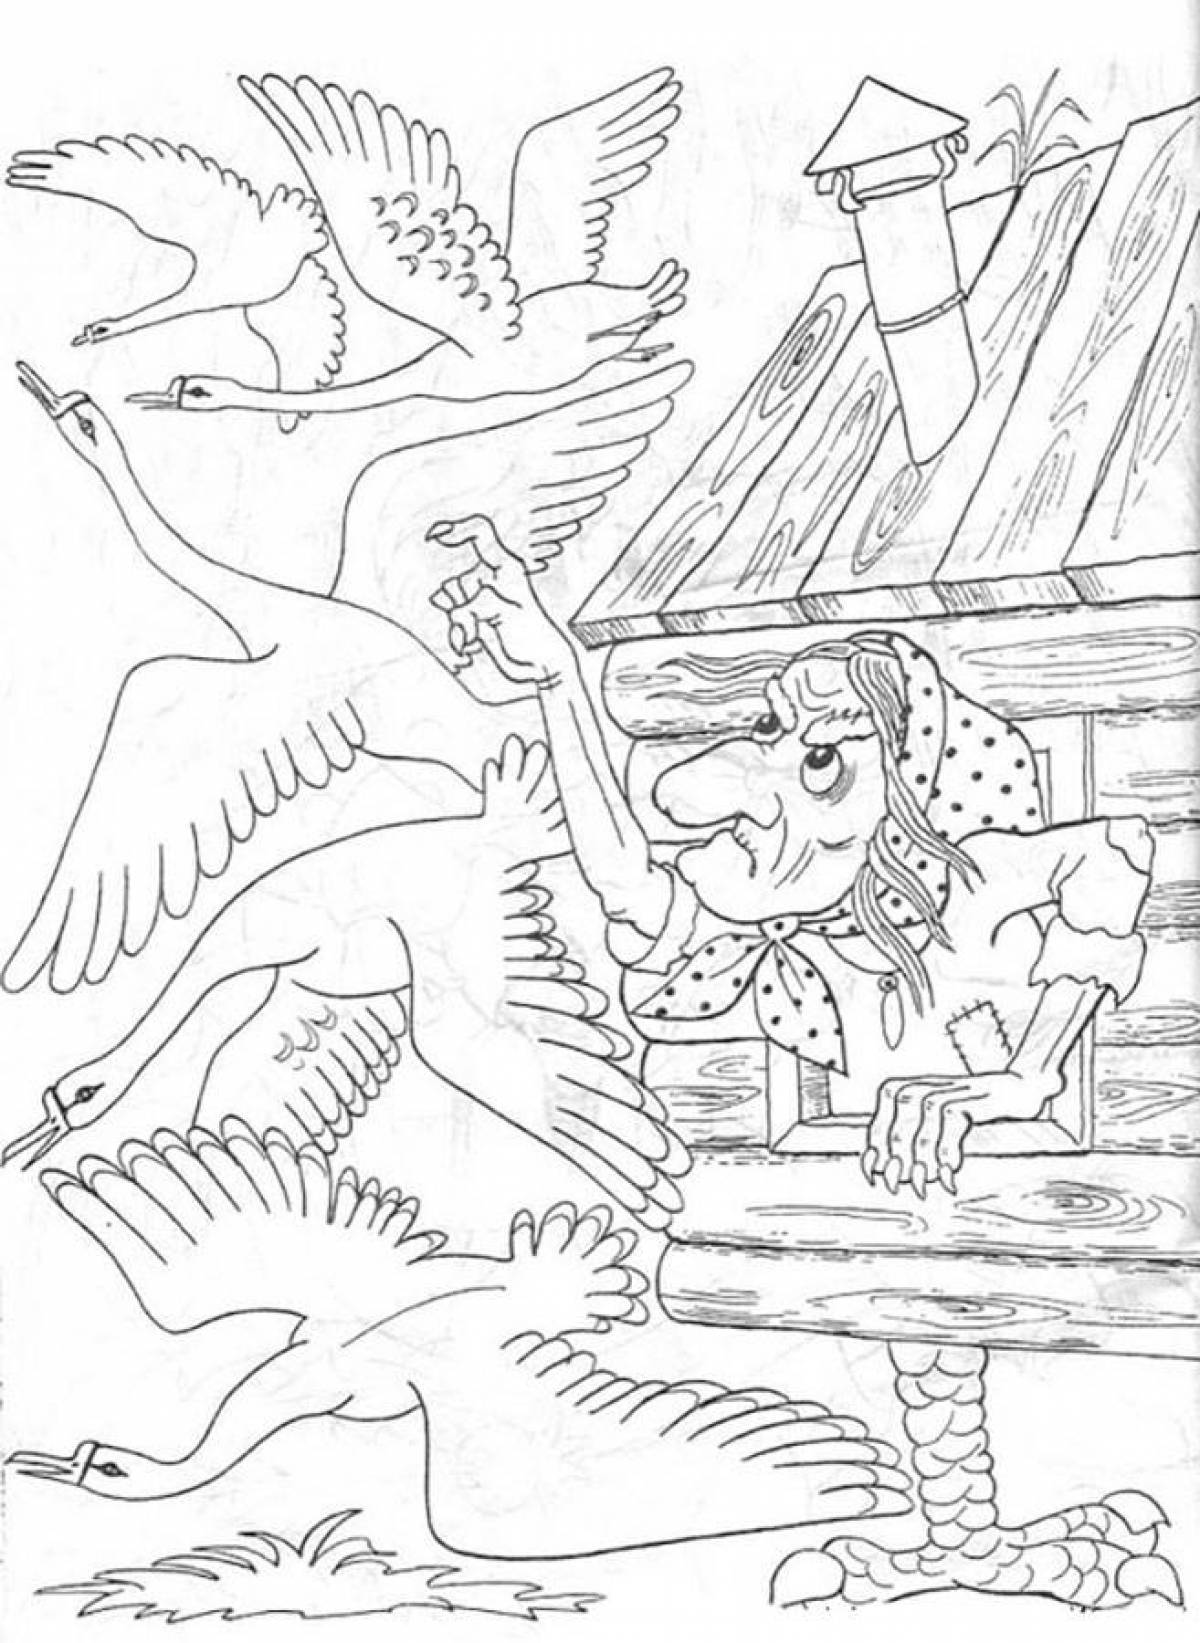 Fine swan geese coloring page